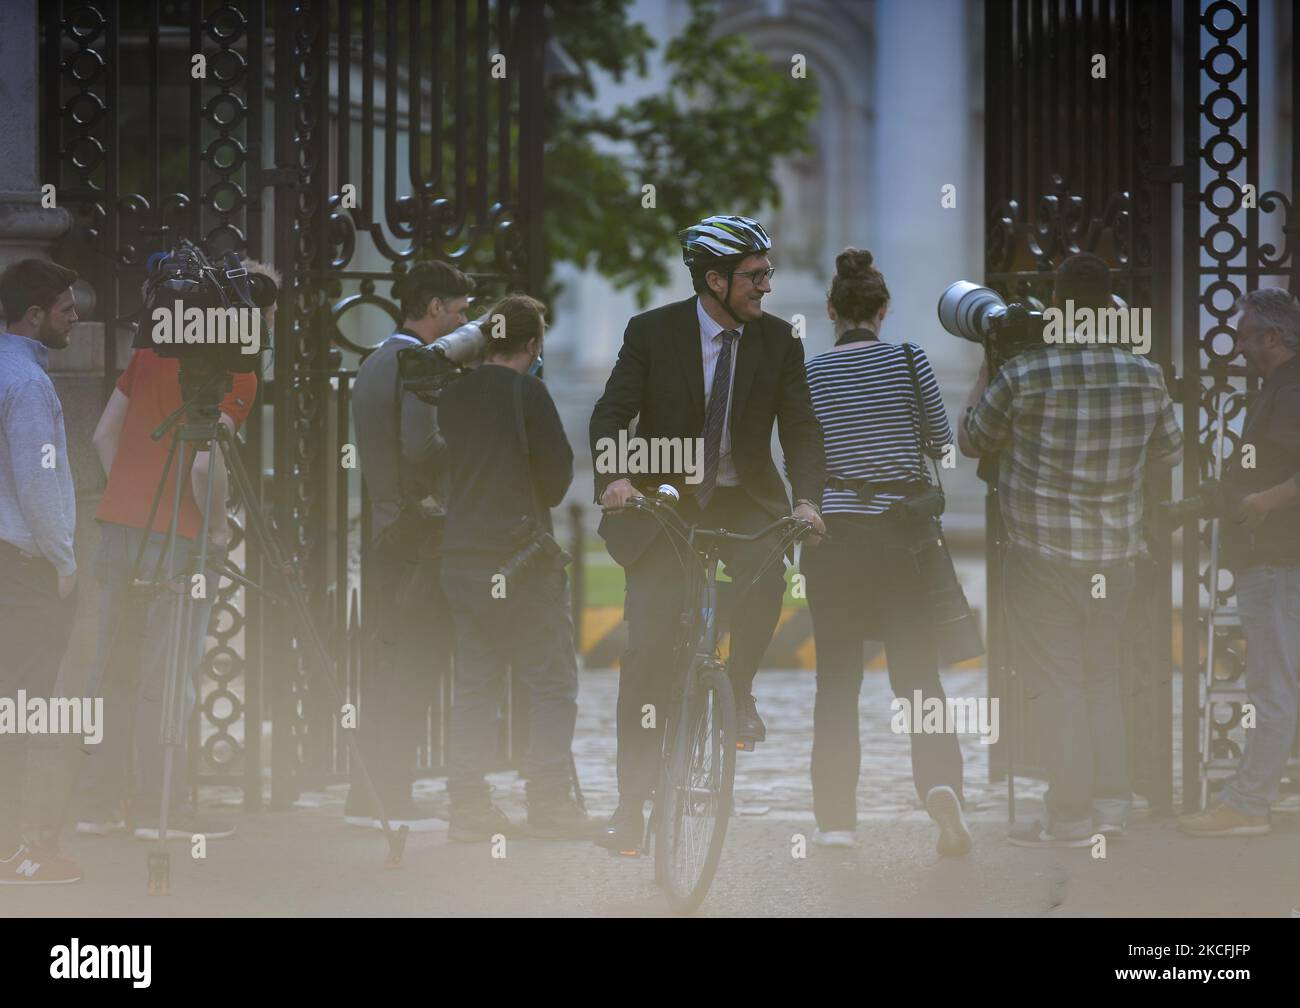 Eamon Ryan (C), Ireland's Minister for Environment, Climate and Communications, leaves the government buildings on his bicycle, with the media representatives at the gate waiting for DUP leader Edwin Poots after meeting Taoiseach Michael Martin. On Thursday, 3 June, 2021, in Dublin, Ireland. (Photo by Artur Widak/NurPhoto) Stock Photo